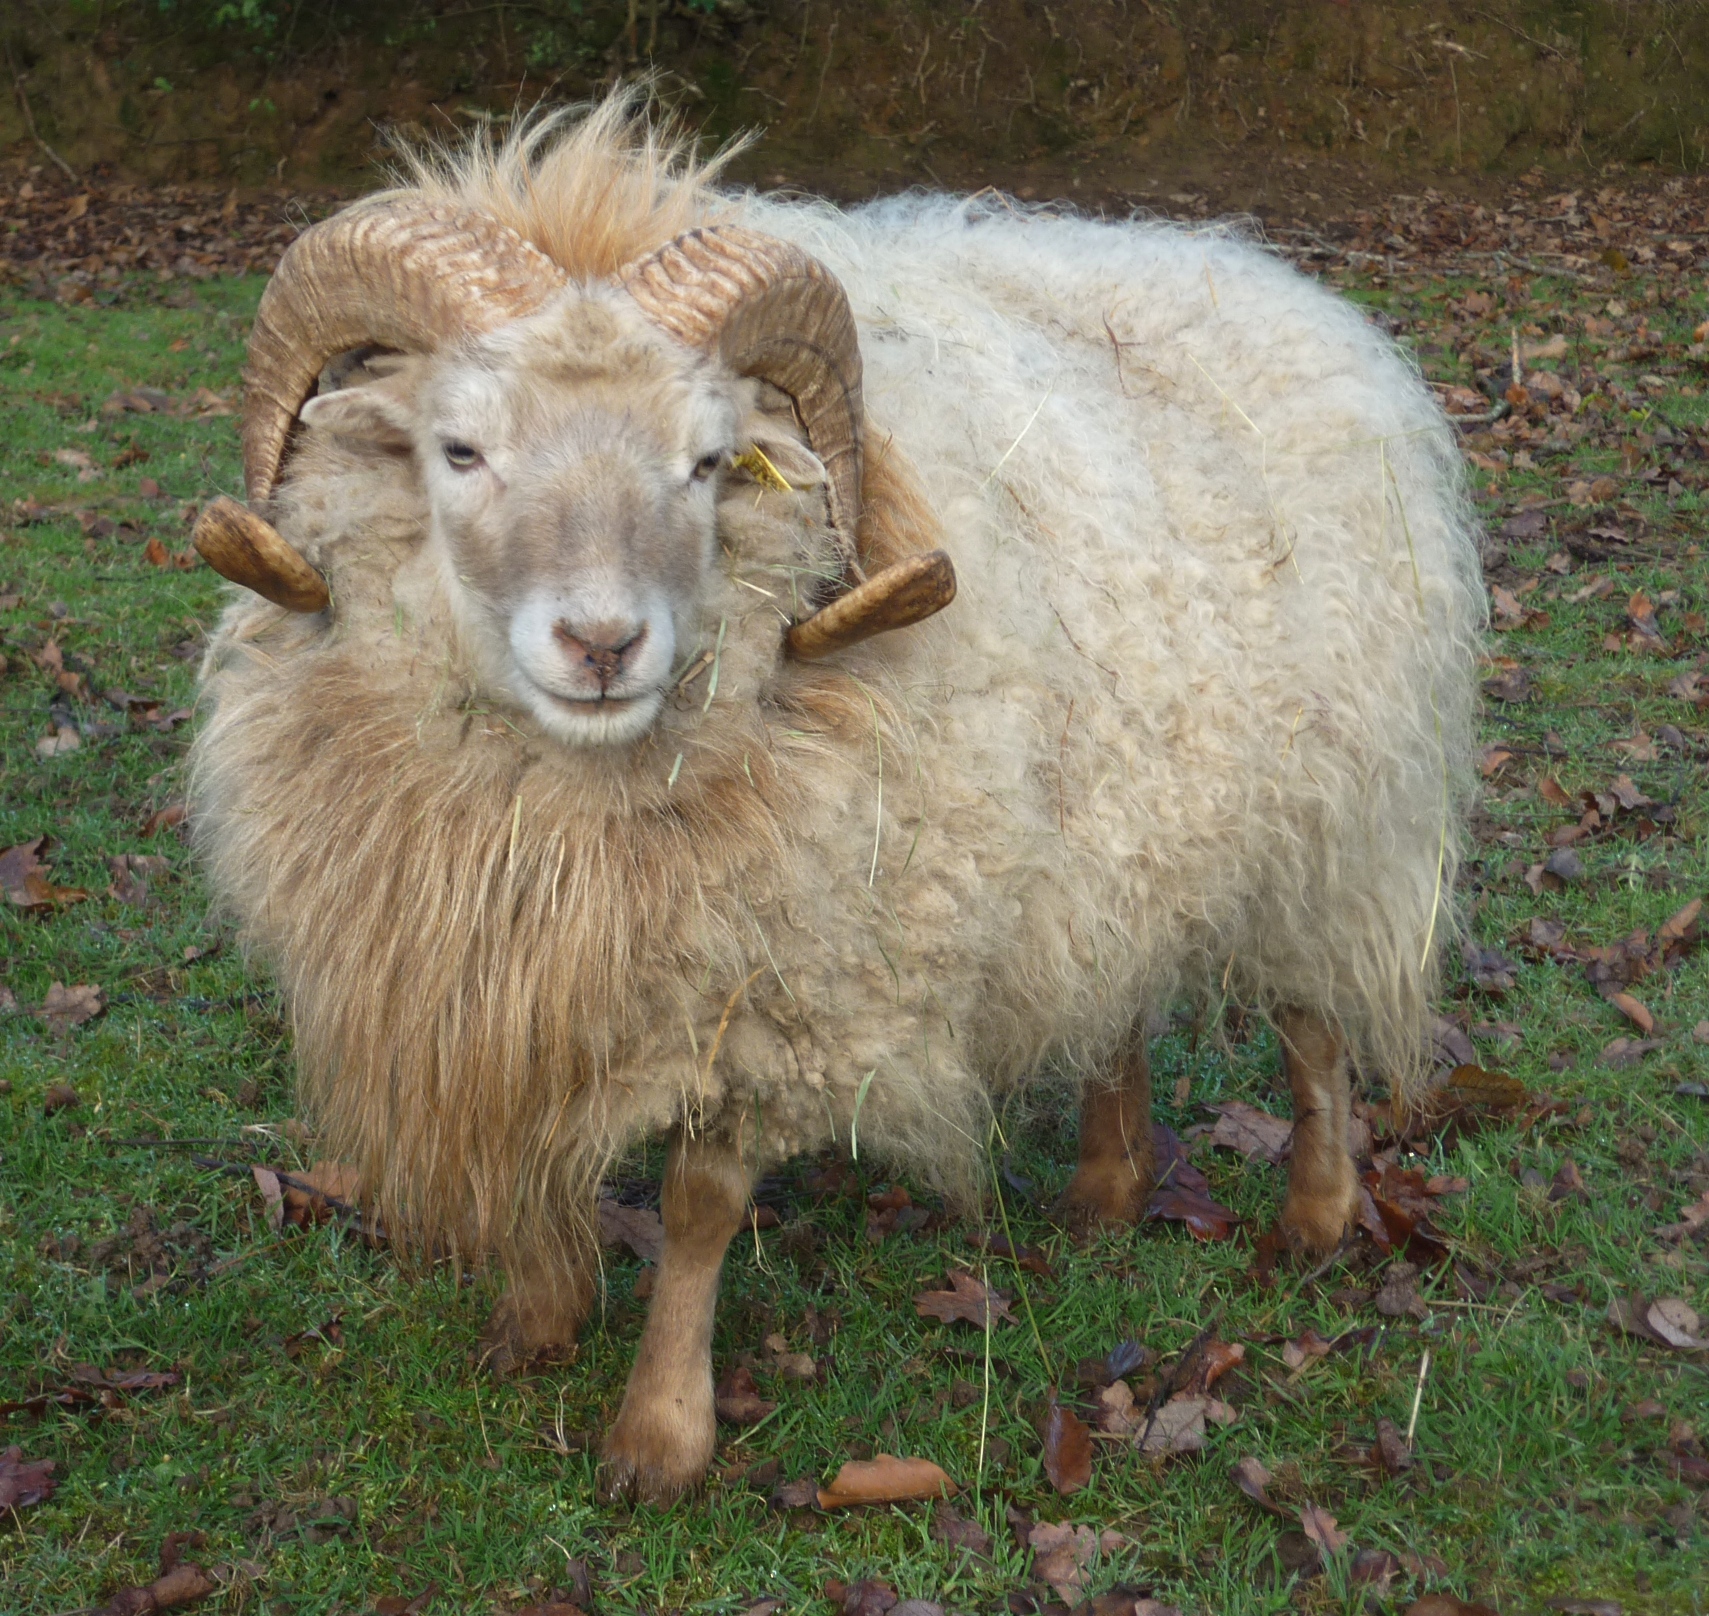 White Ouessant ram. Photo © D. Falck and used with kind permission